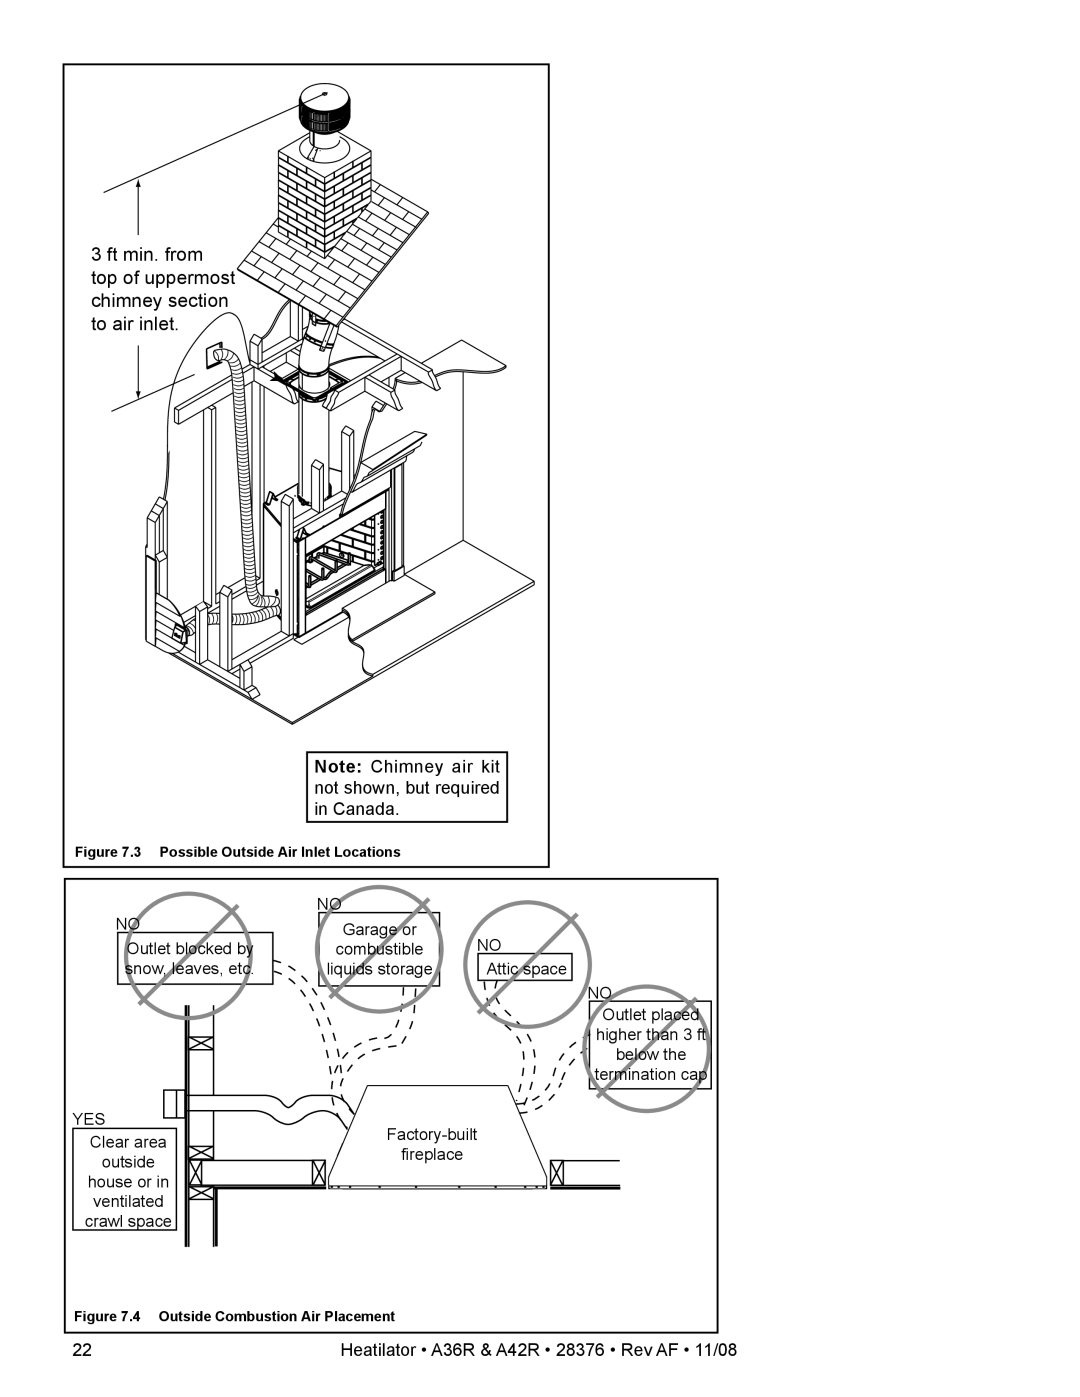 Hearth and Home Technologies A36RH, A42RH owner manual Ft min. from top of uppermost chimney section to air inlet 